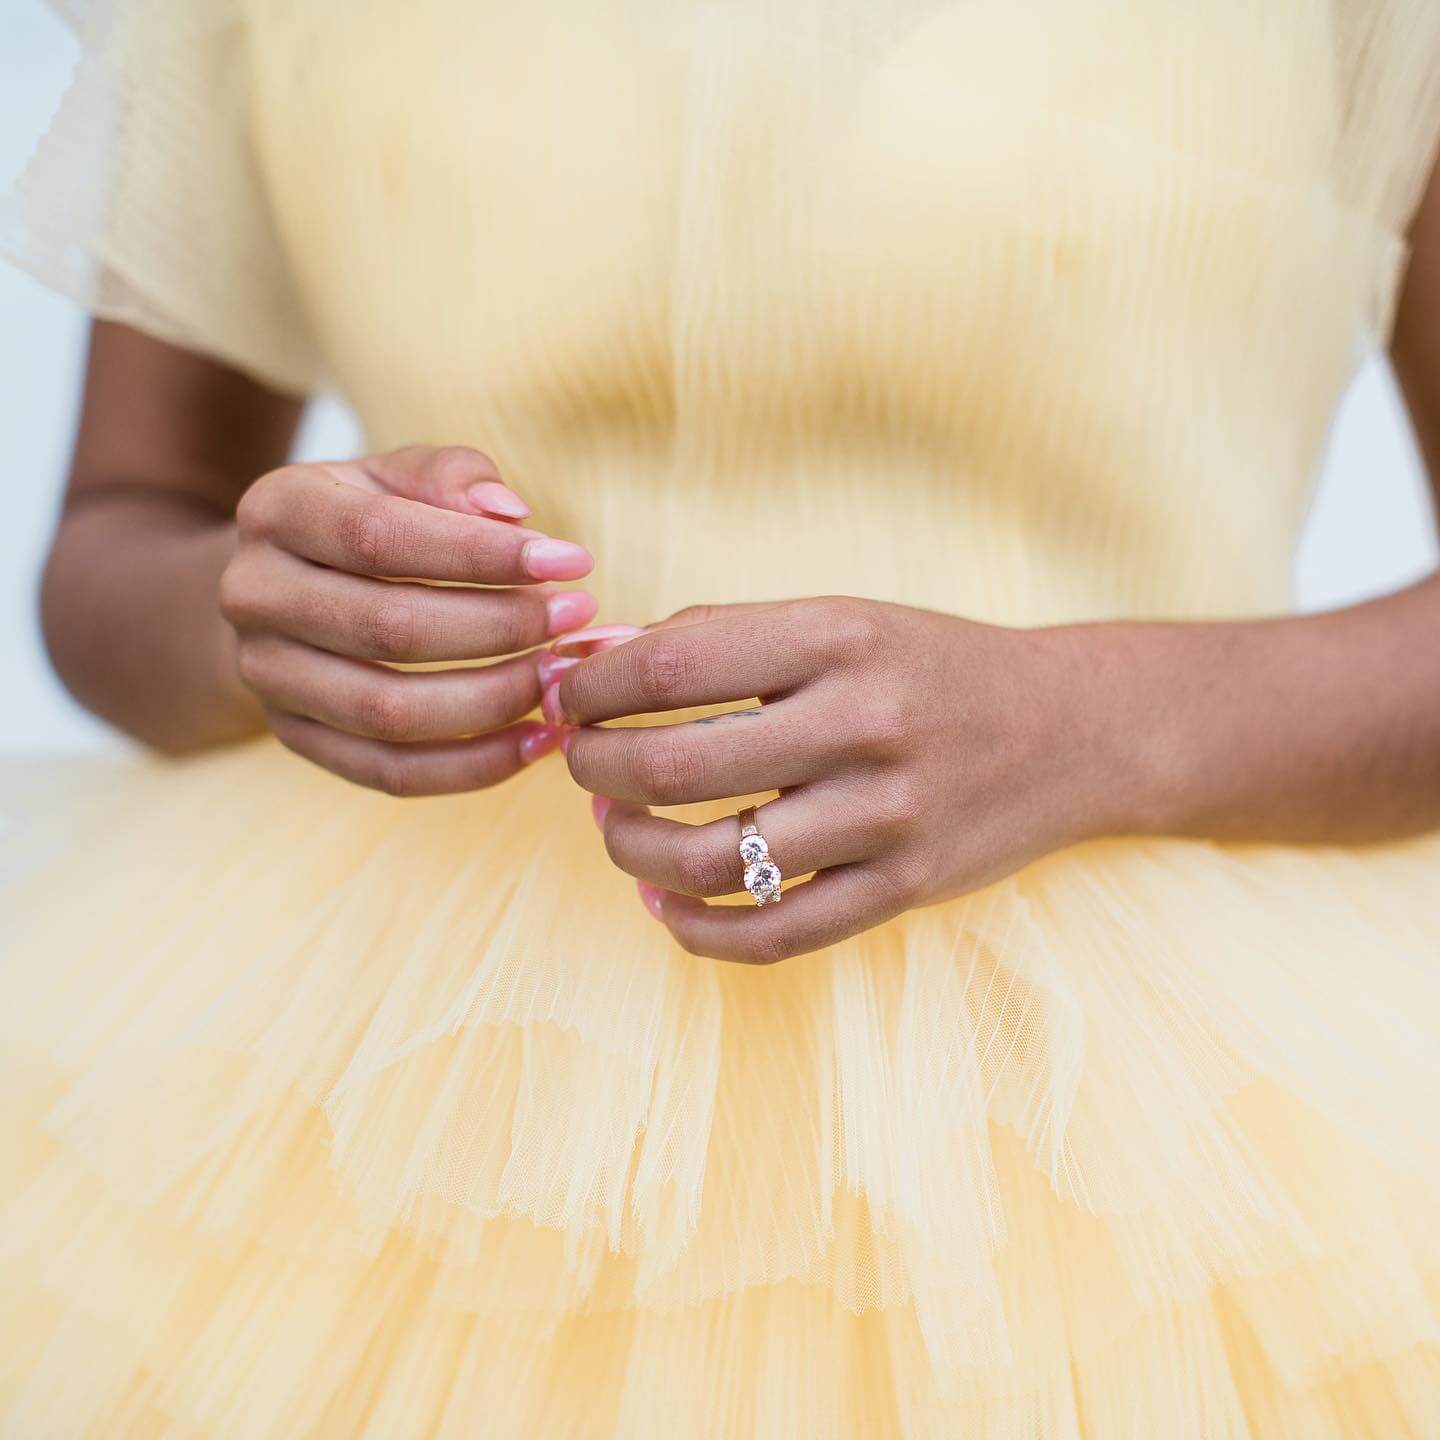 Gold Jewelry with Yellow Dress